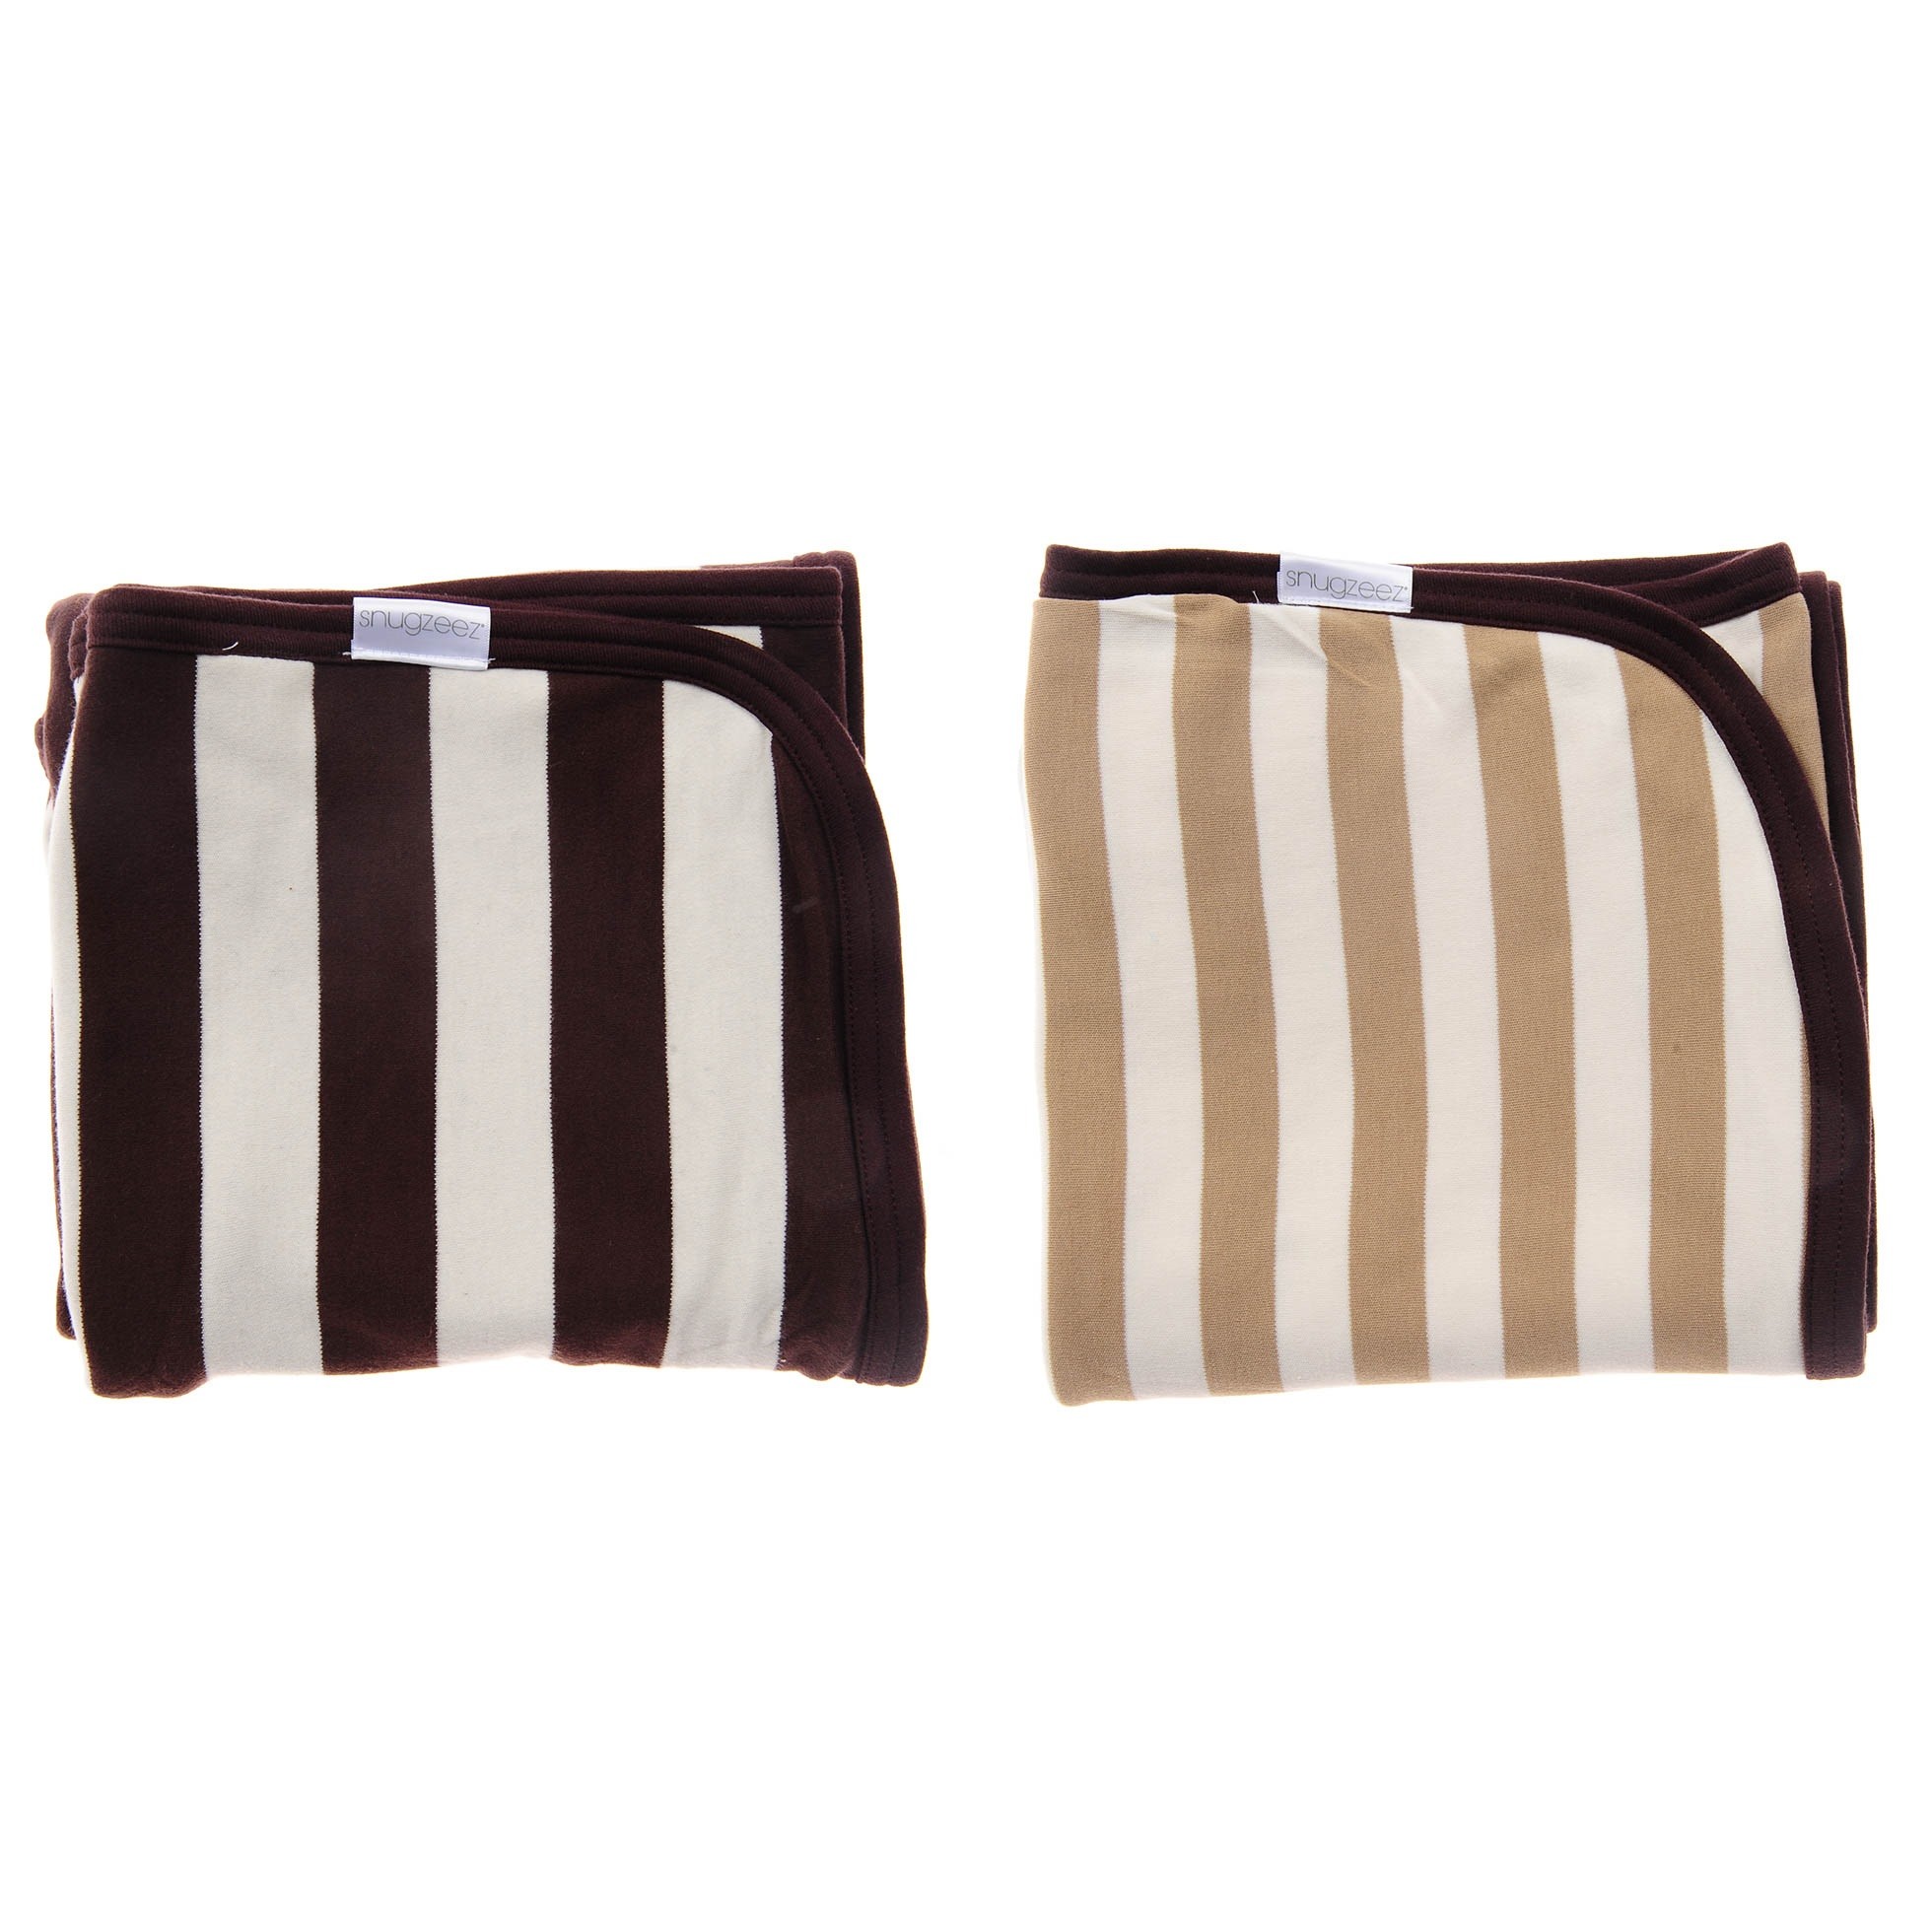 Double-Layered Striped Blanket Set - Brown/Beige